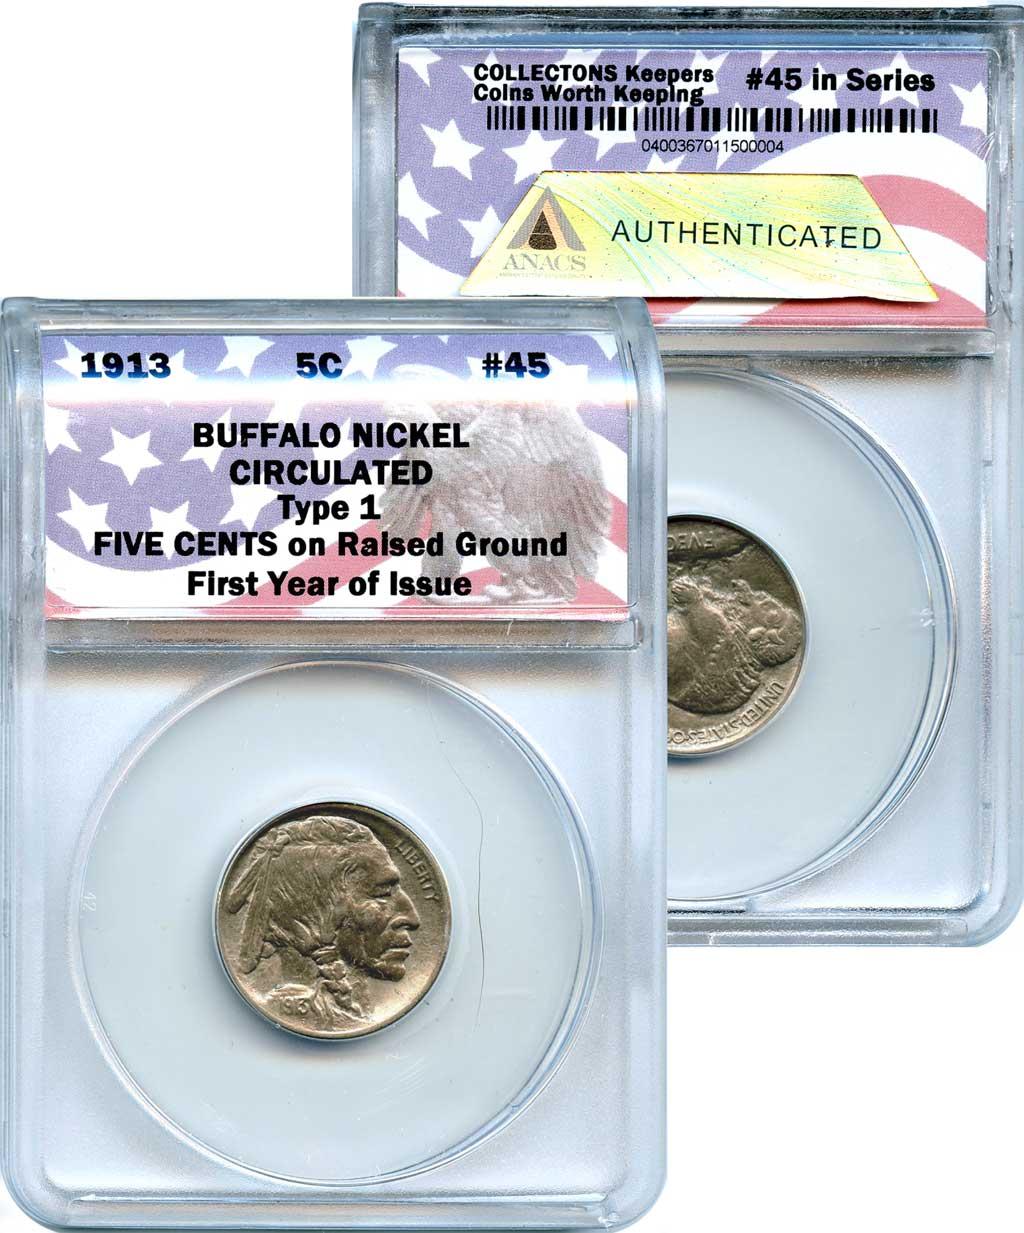 CollecTons Keepers #45: 1913 Type I Buffalo Nickel Certified in Exclusive ANACS Holder